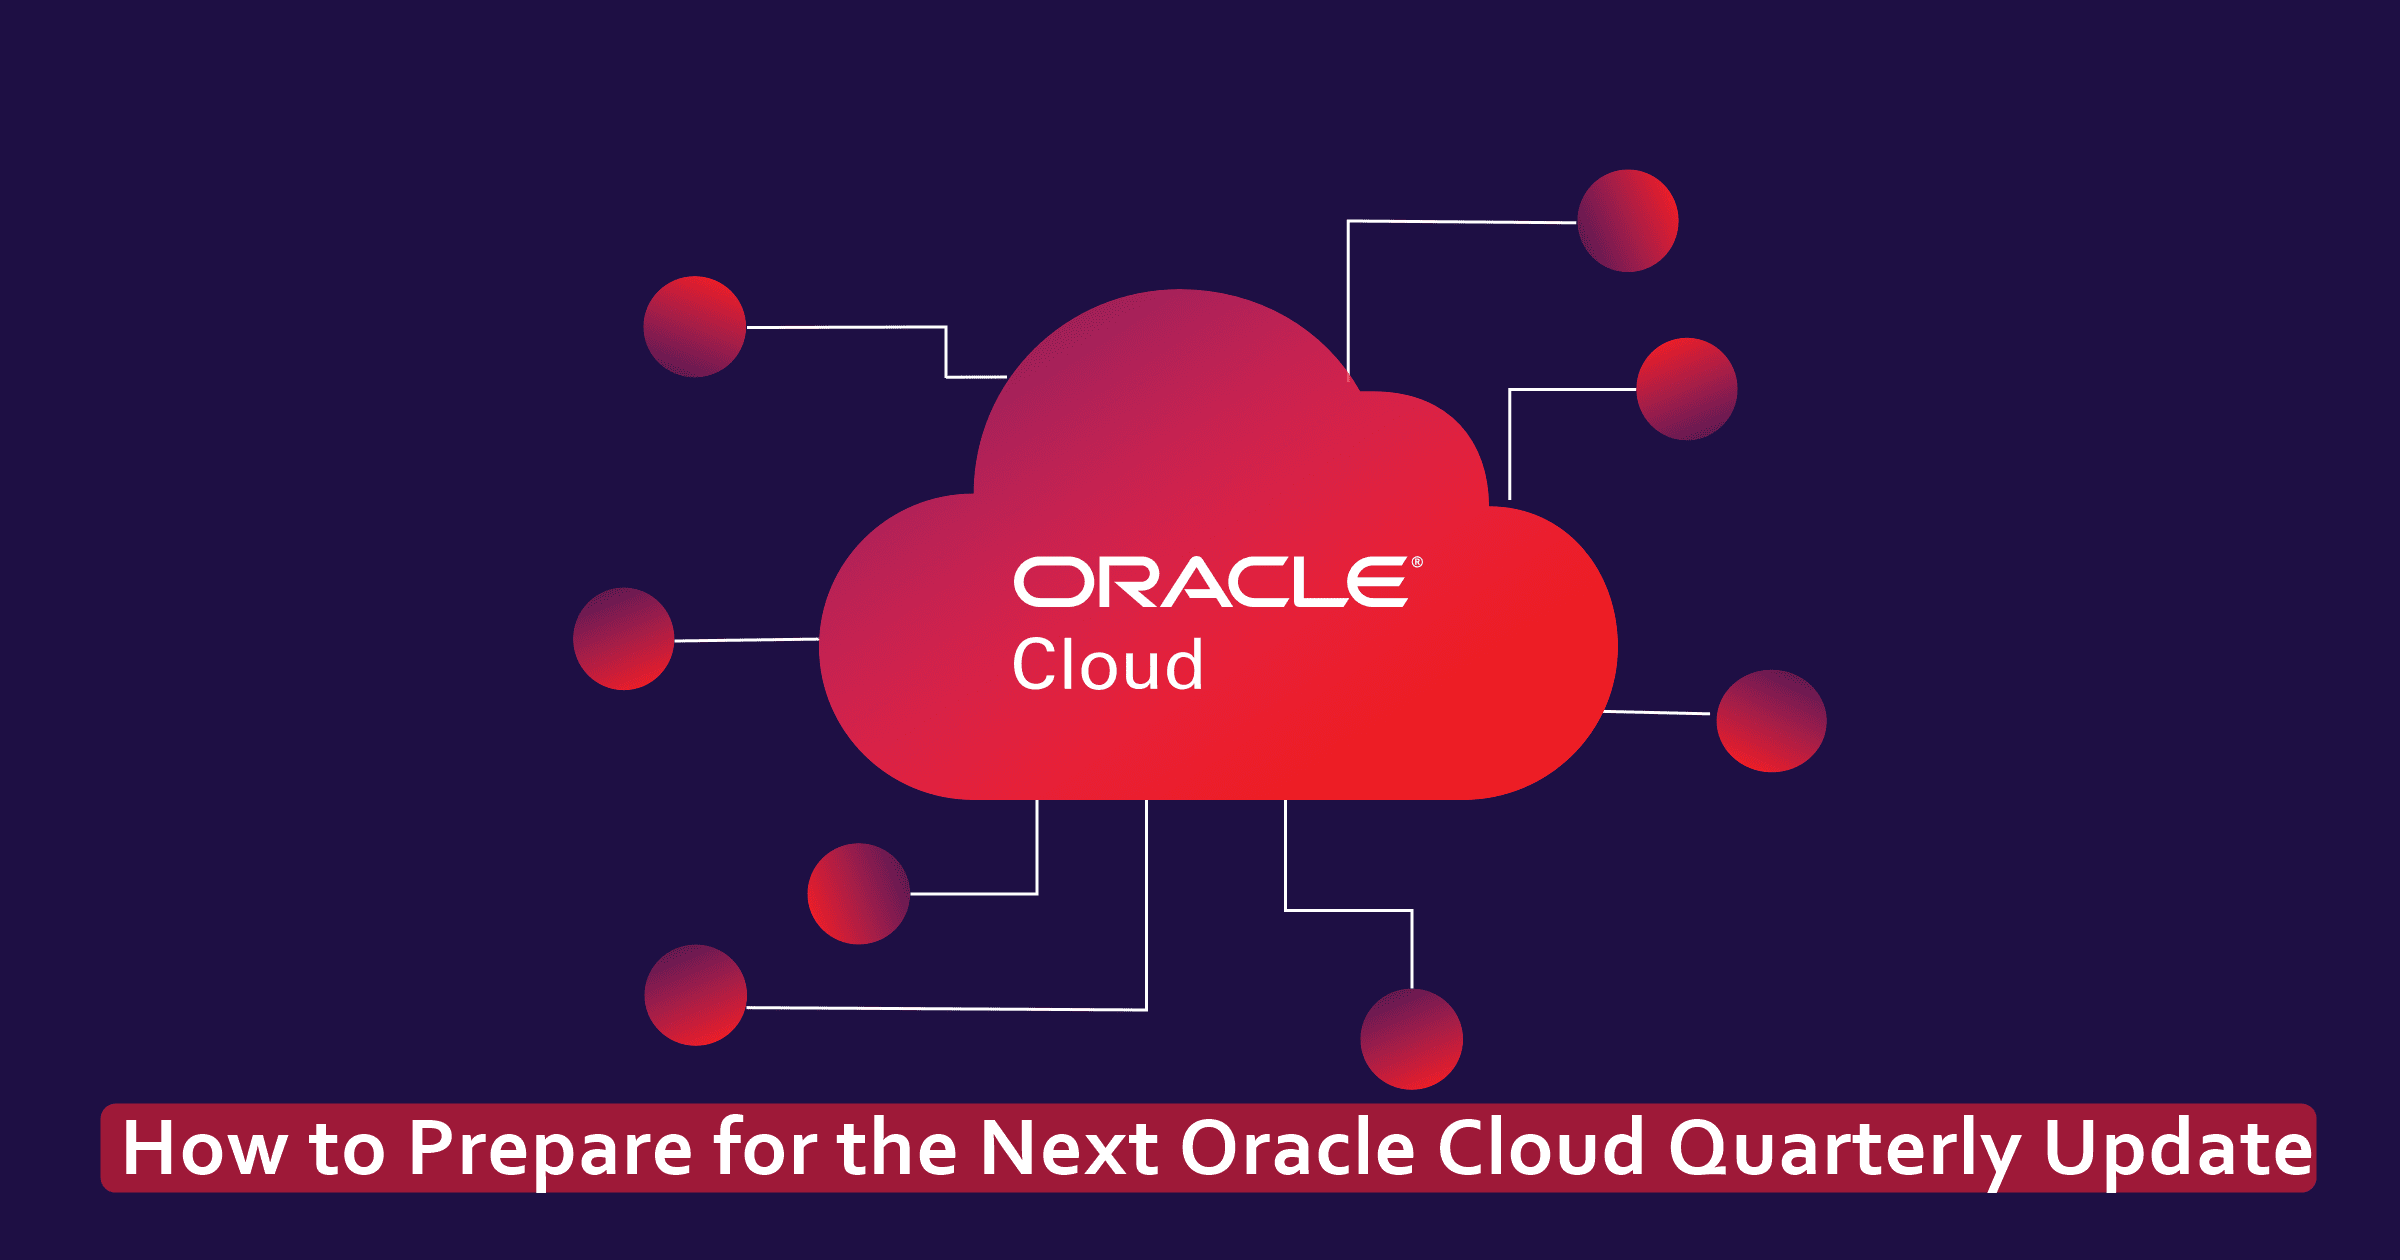 How to Prepare for the Next Oracle Cloud Quarterly Update